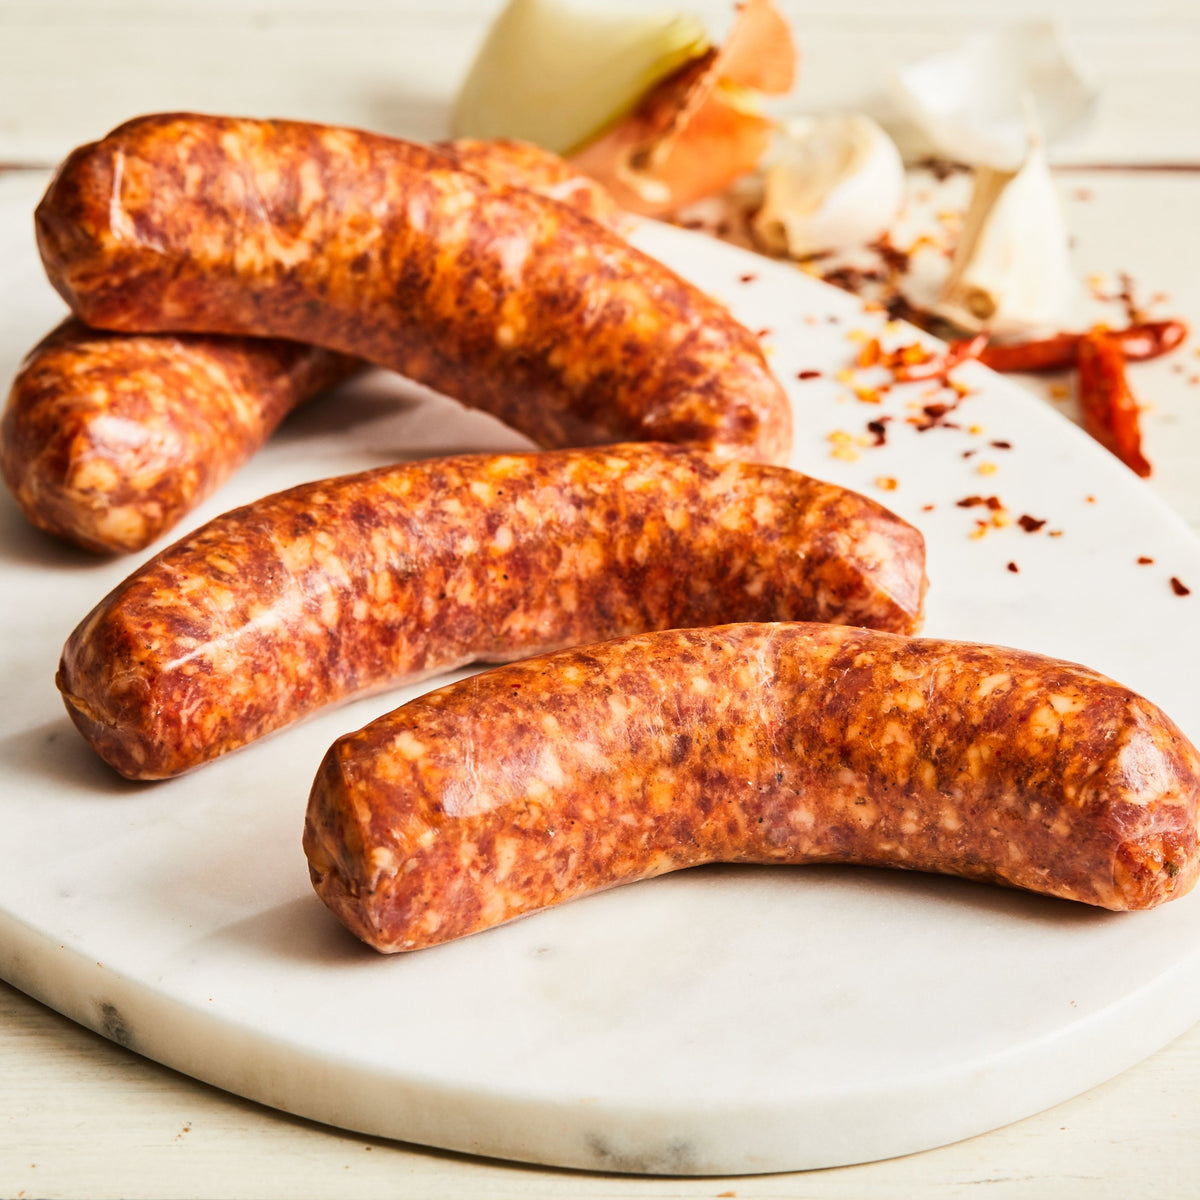 Image of Hot Italian sausage. 4 links, about 1 lb. a fresh, uncooked Italian pork sausage made with toasted fennel seed, coriander, black pepper, garlic, oregano, roasted red pepper, and Calabrian chili